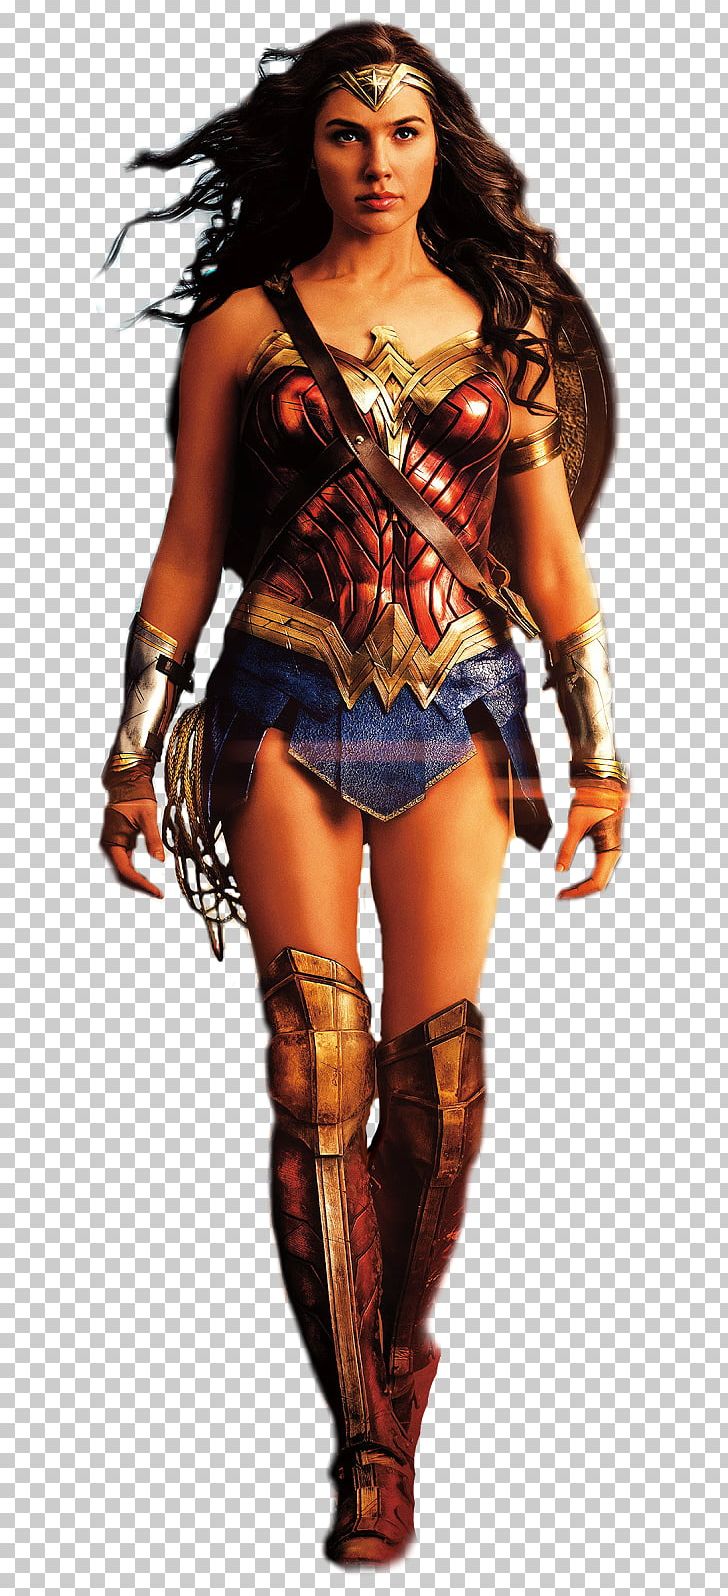 Gal Gadot Diana Prince Wonder Woman Female Superhero Movie PNG, Clipart, Batman V Superman Dawn Of Justice, Celebrities, Costume, Costume Design, Dc Extended Universe Free PNG Download